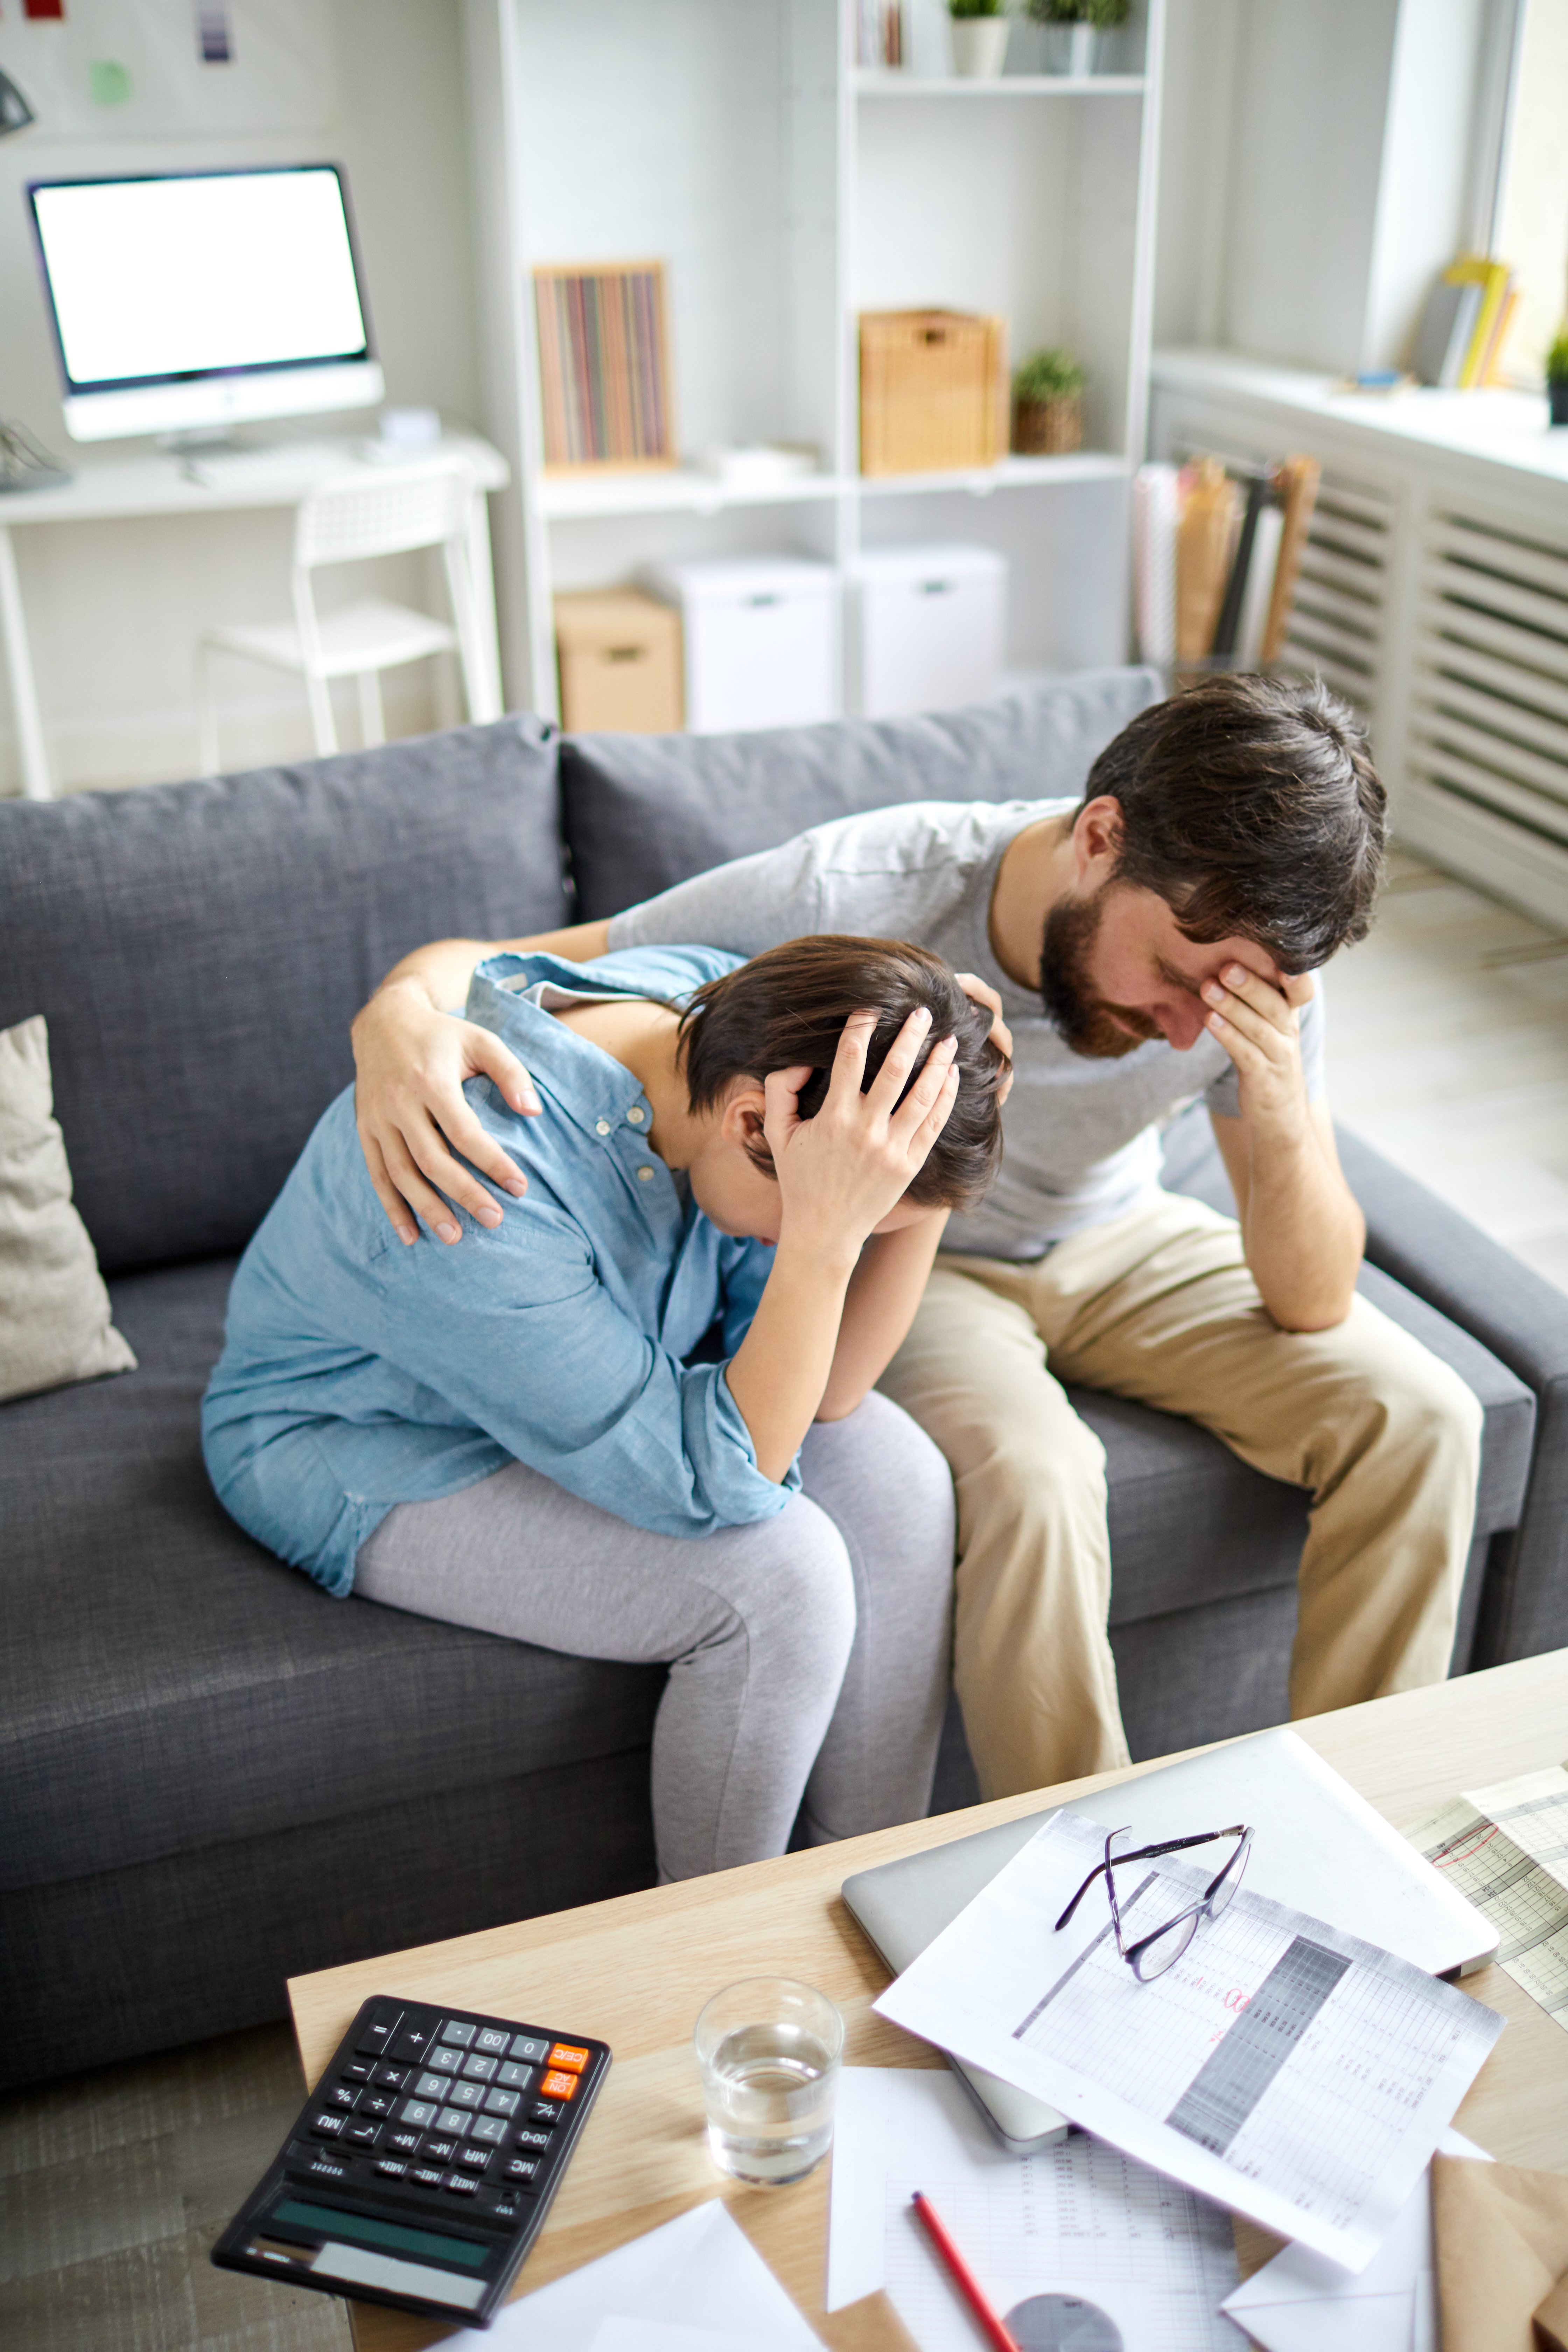 A young girl in despair leaning towards a disappointed man | Source: Shutterstock